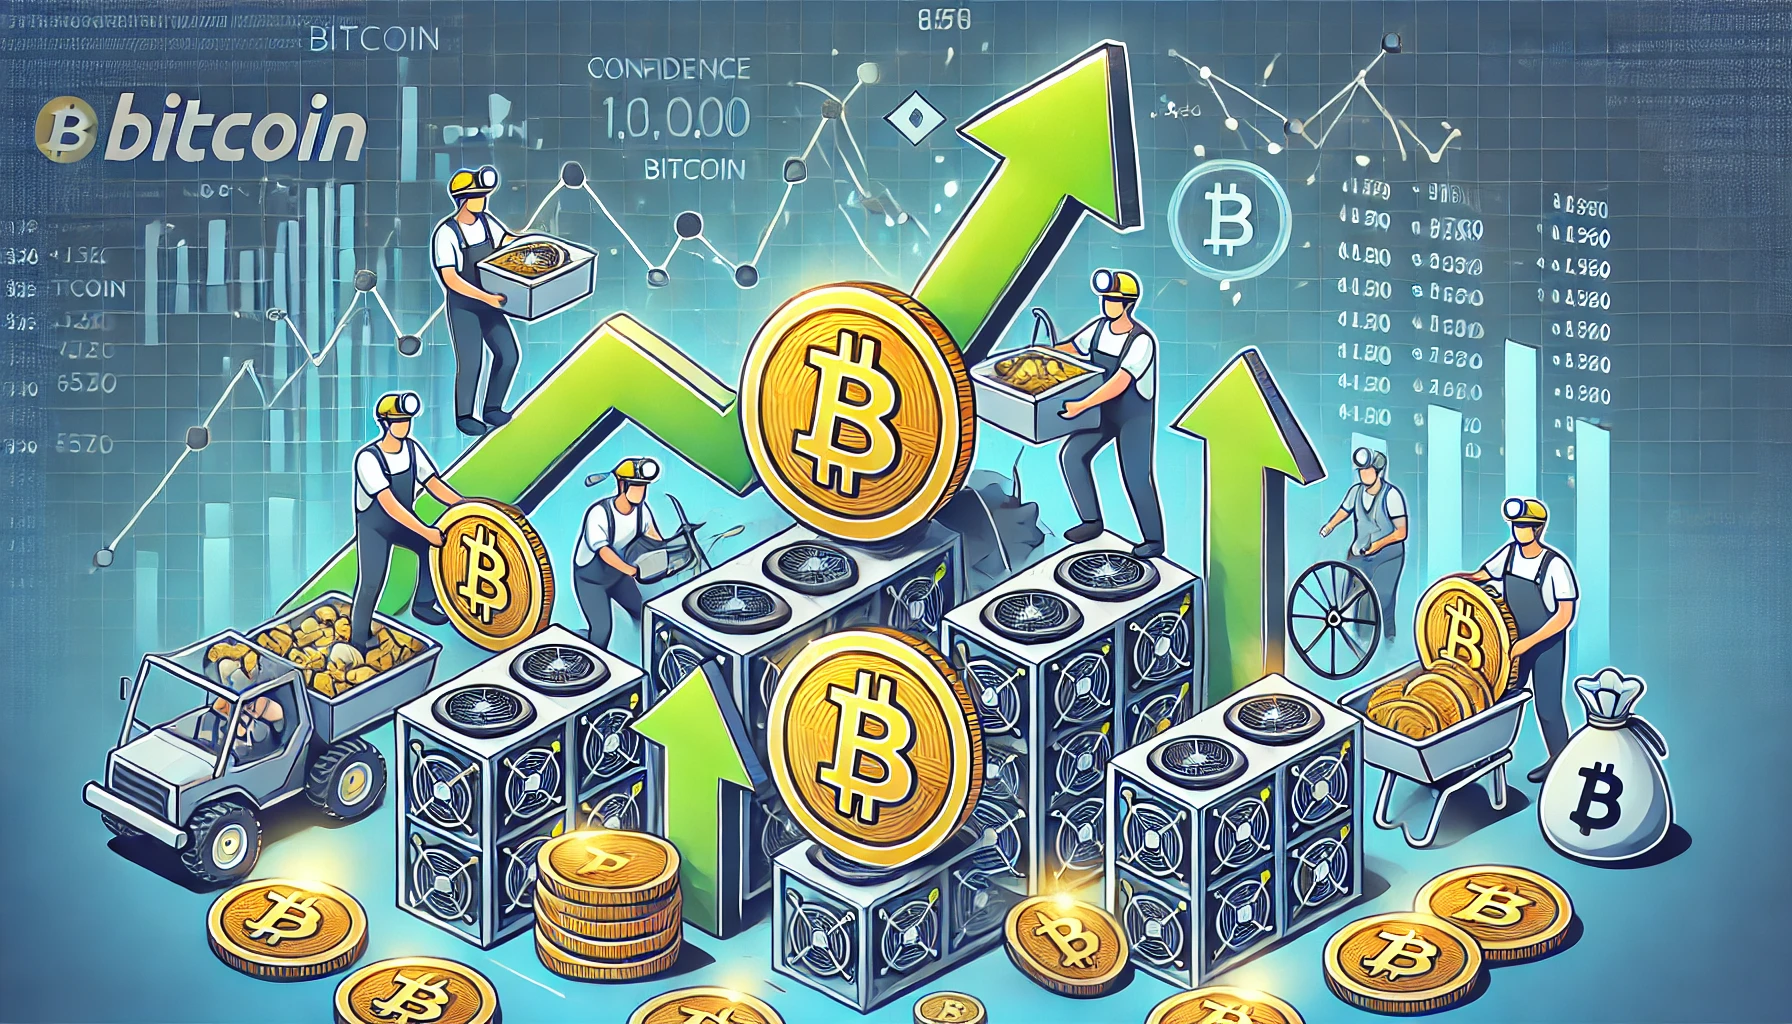 Bitcoin Miners Accumulate as Confidence in Market Grows